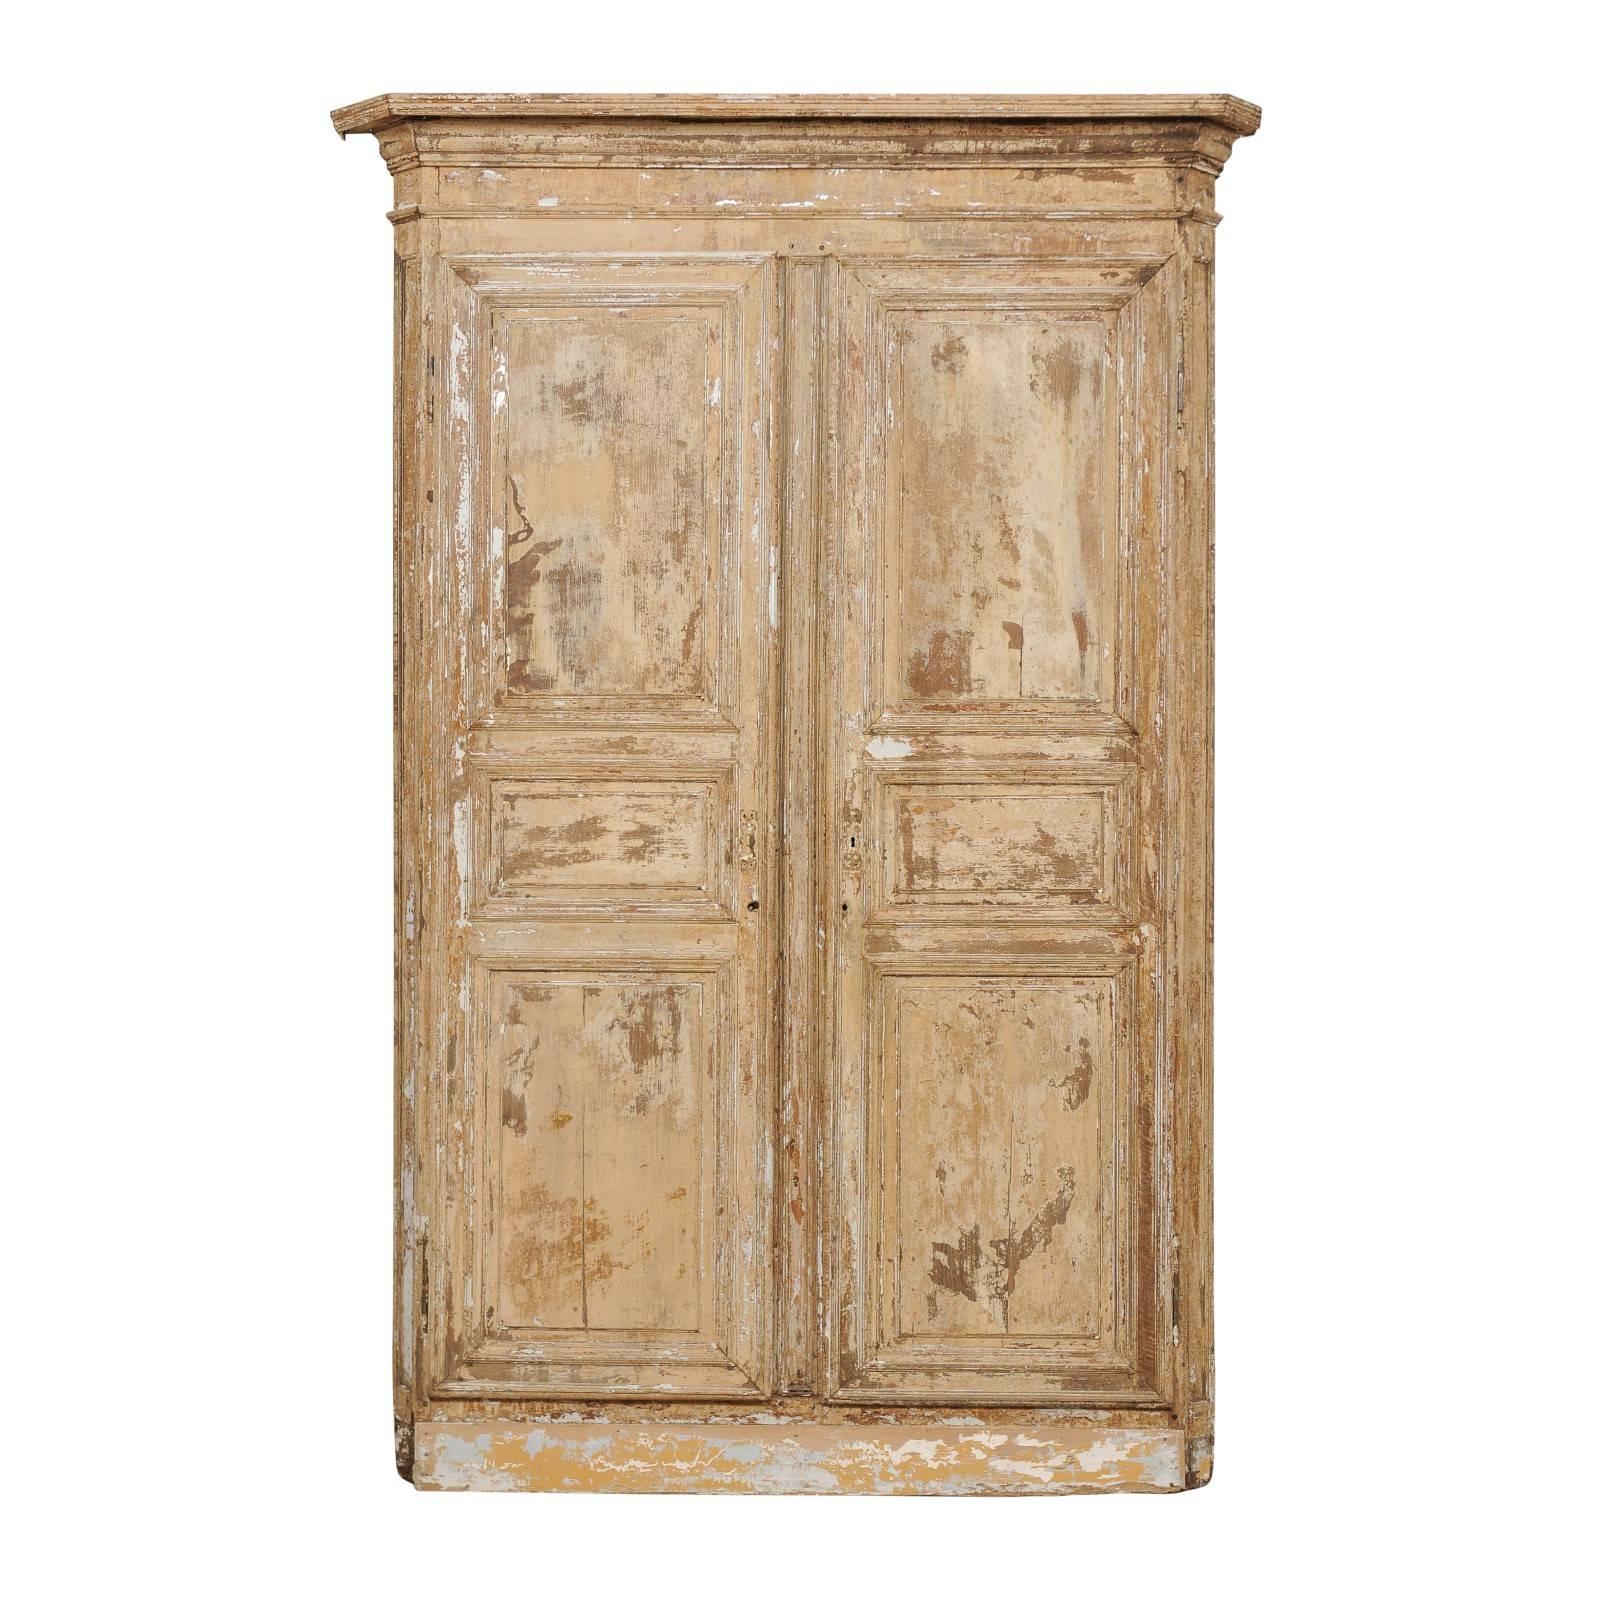 An Italian Pair of Early 19th C. Wood Doors Within Original Casing & Molding For Sale